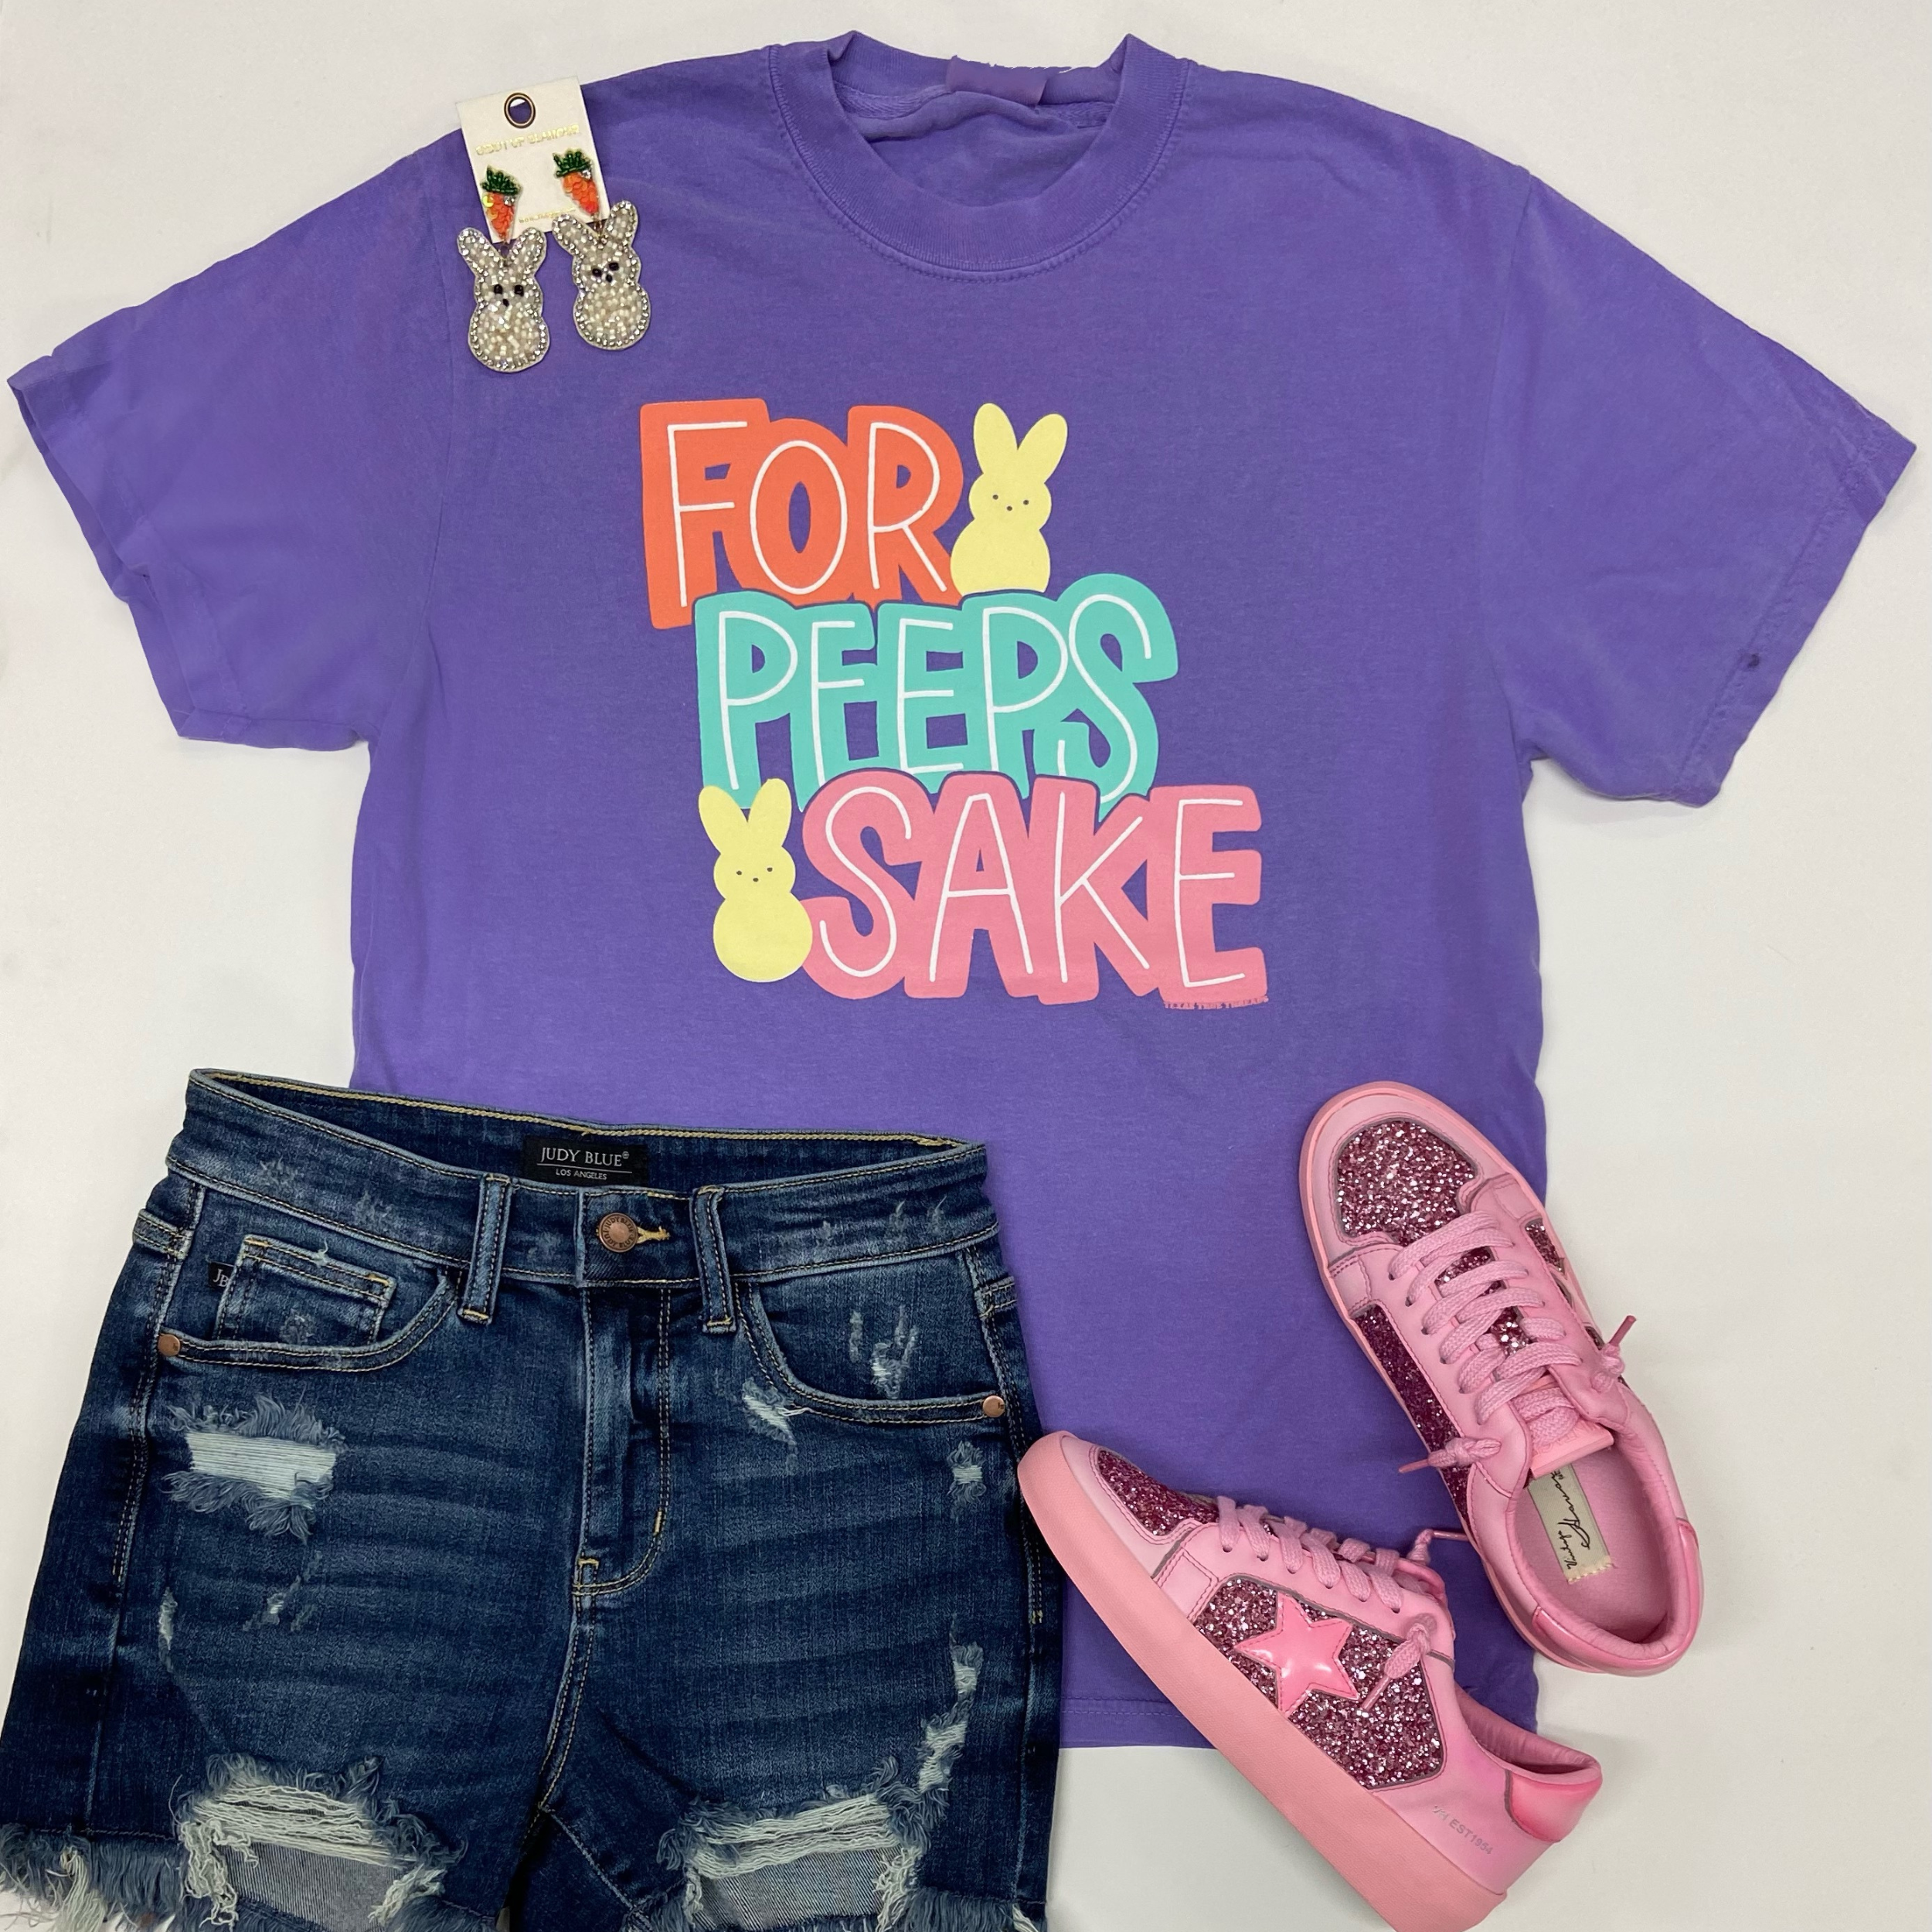 A purple graphic tee shirt that says "For Peeps Sake" with yellow peeps. Pictured on a white background with pink sneakers, distressed shorts, and peep earrings.